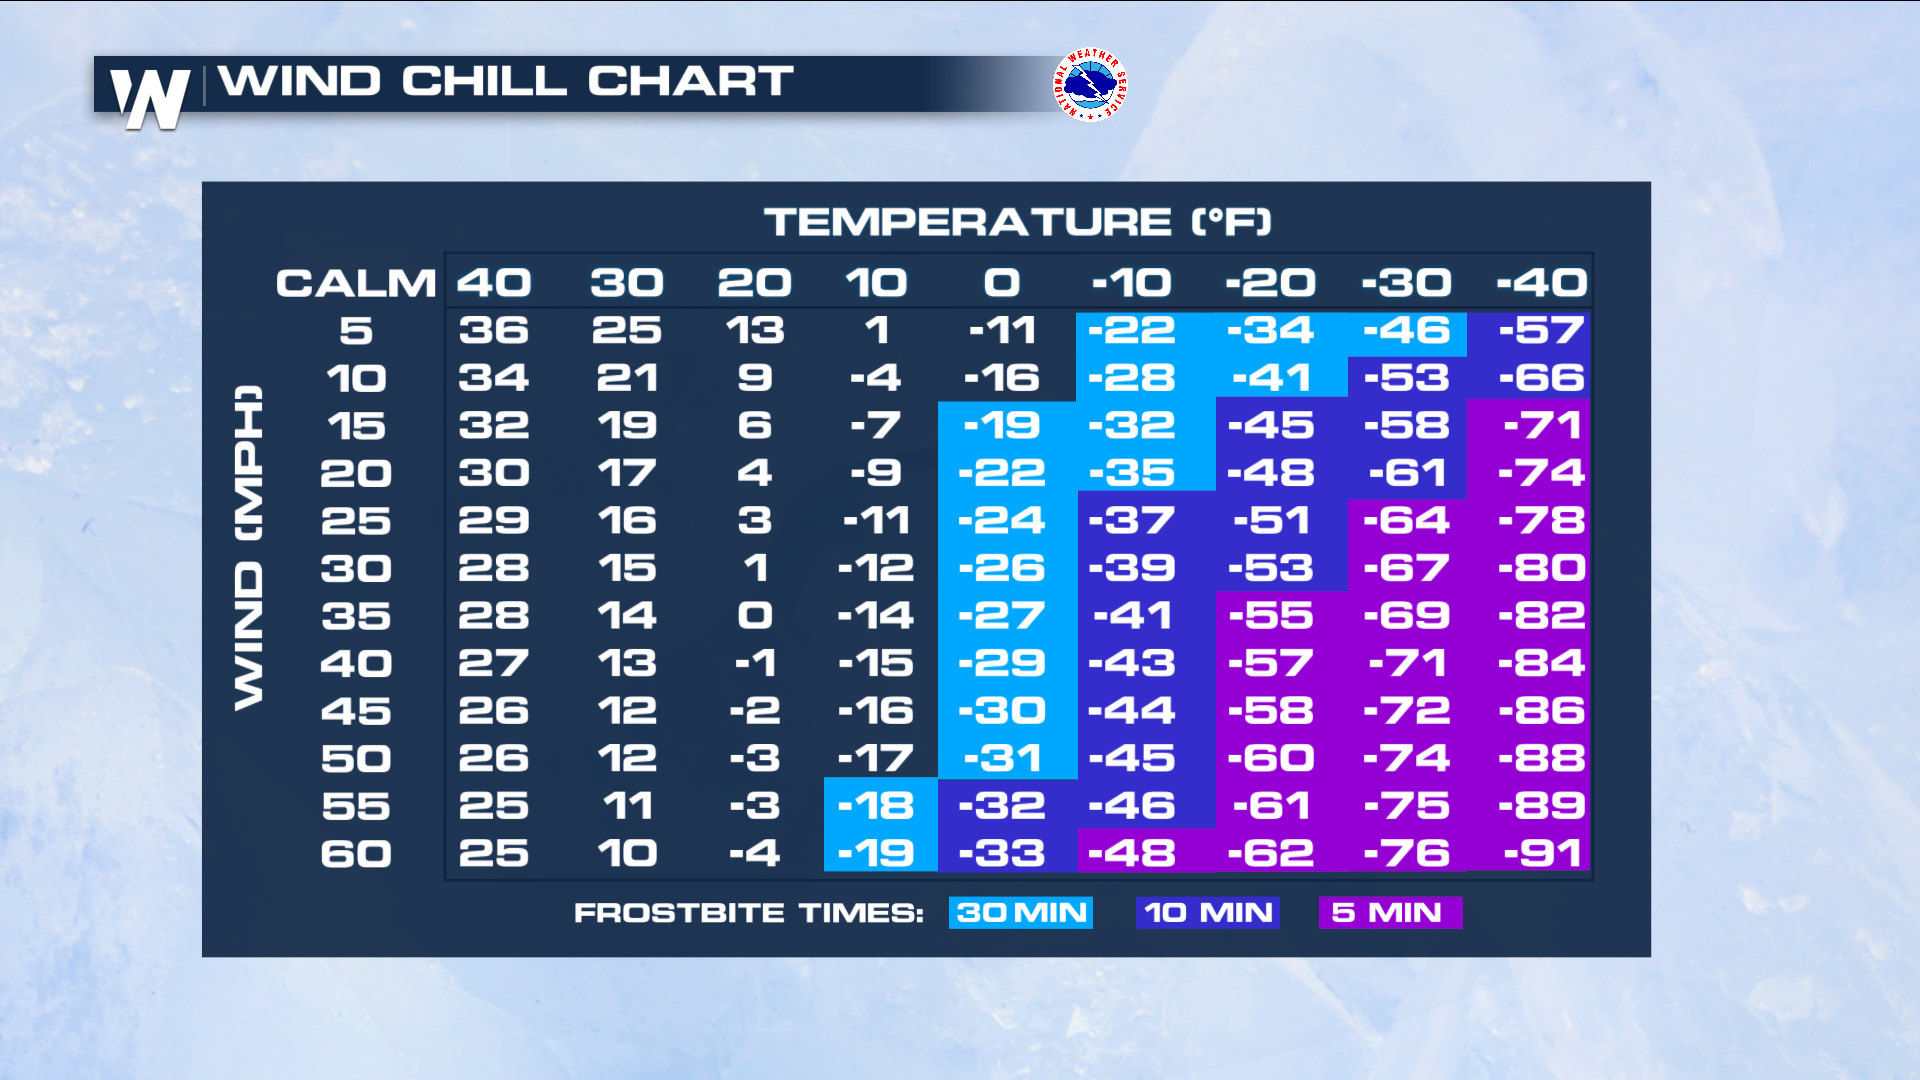 old wind chill chart to new